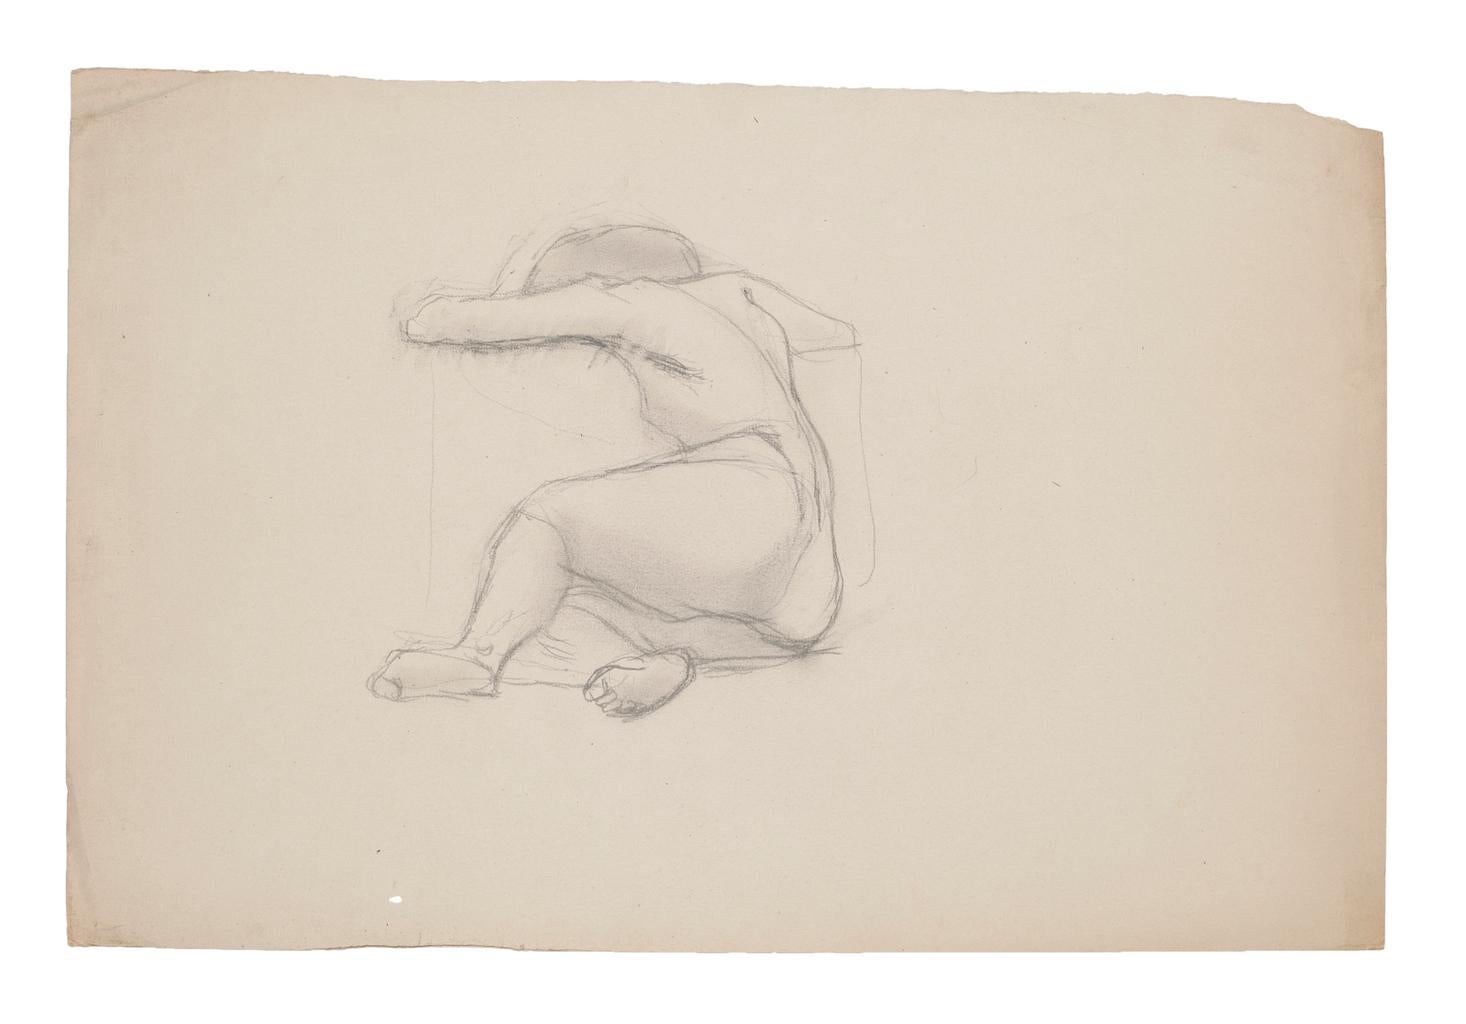 Nude Woman - Original Pencil on Paper - 20th Century - Art by Unknown